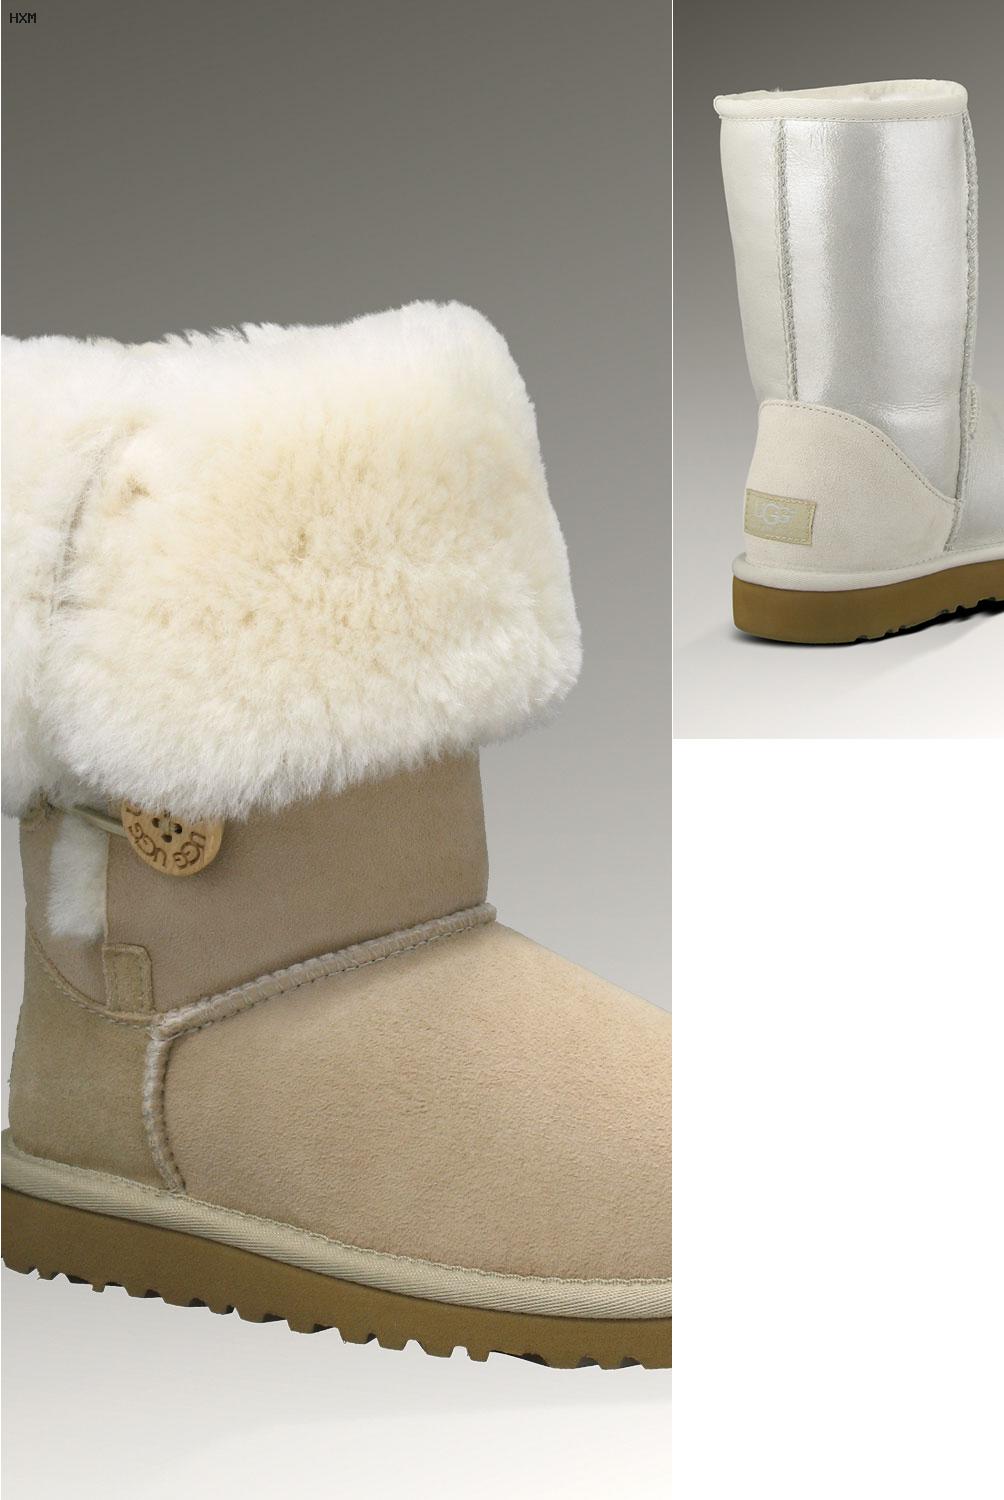 imitation ugg boots offers